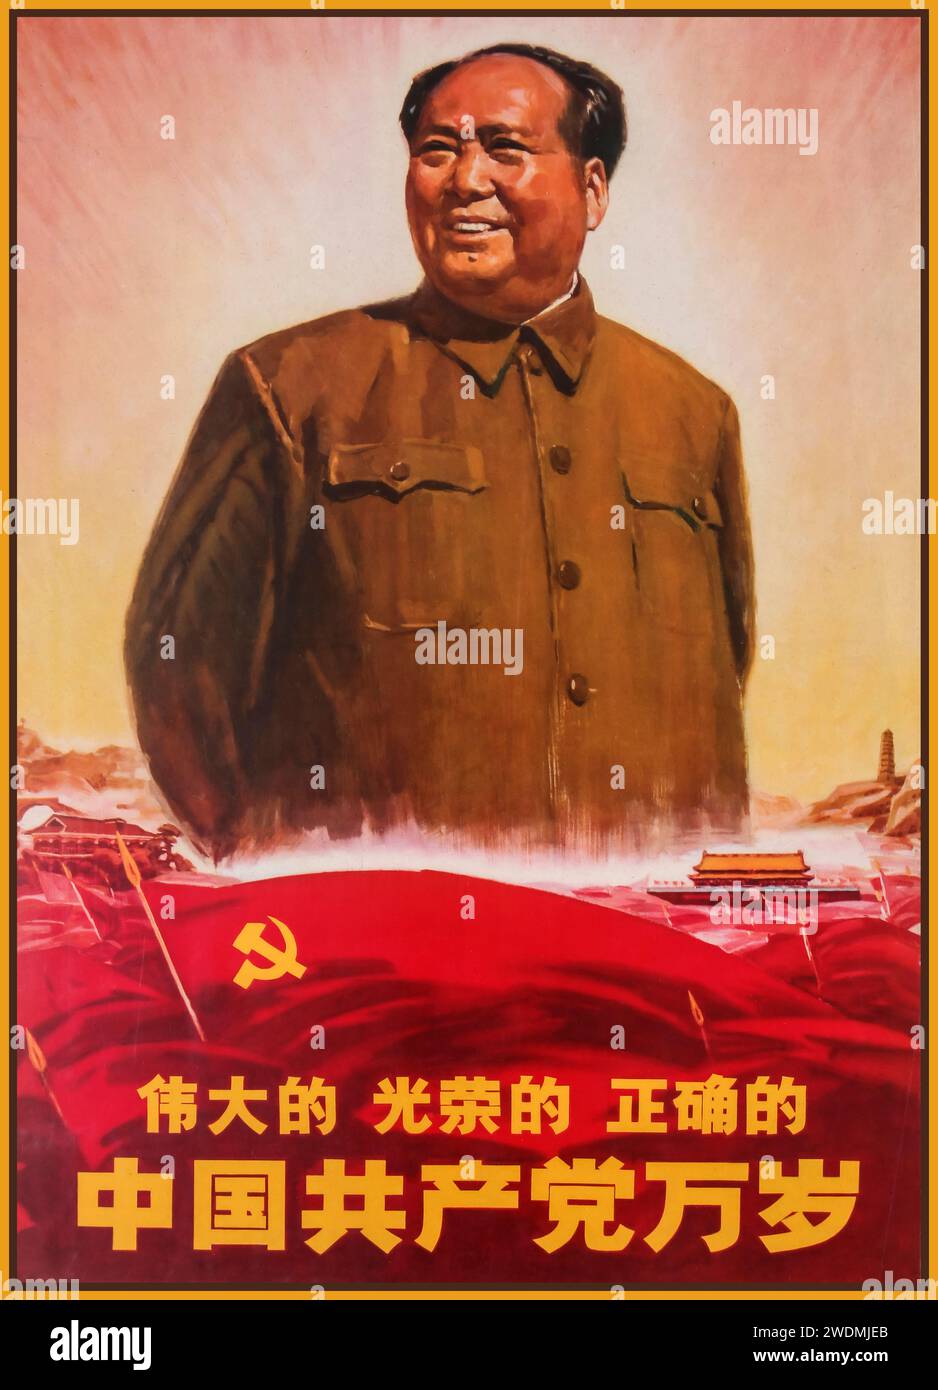 CHAIRMAN MAO Propaganda poster Mao Zedong. ' GREAT GLORIOUS GOOD, LONG LIVE THE COMMUNIST PARTY' Illustration features smiling Mao Zedong and communist flags under him.  Country: China. Year: 1969. Stock Photo